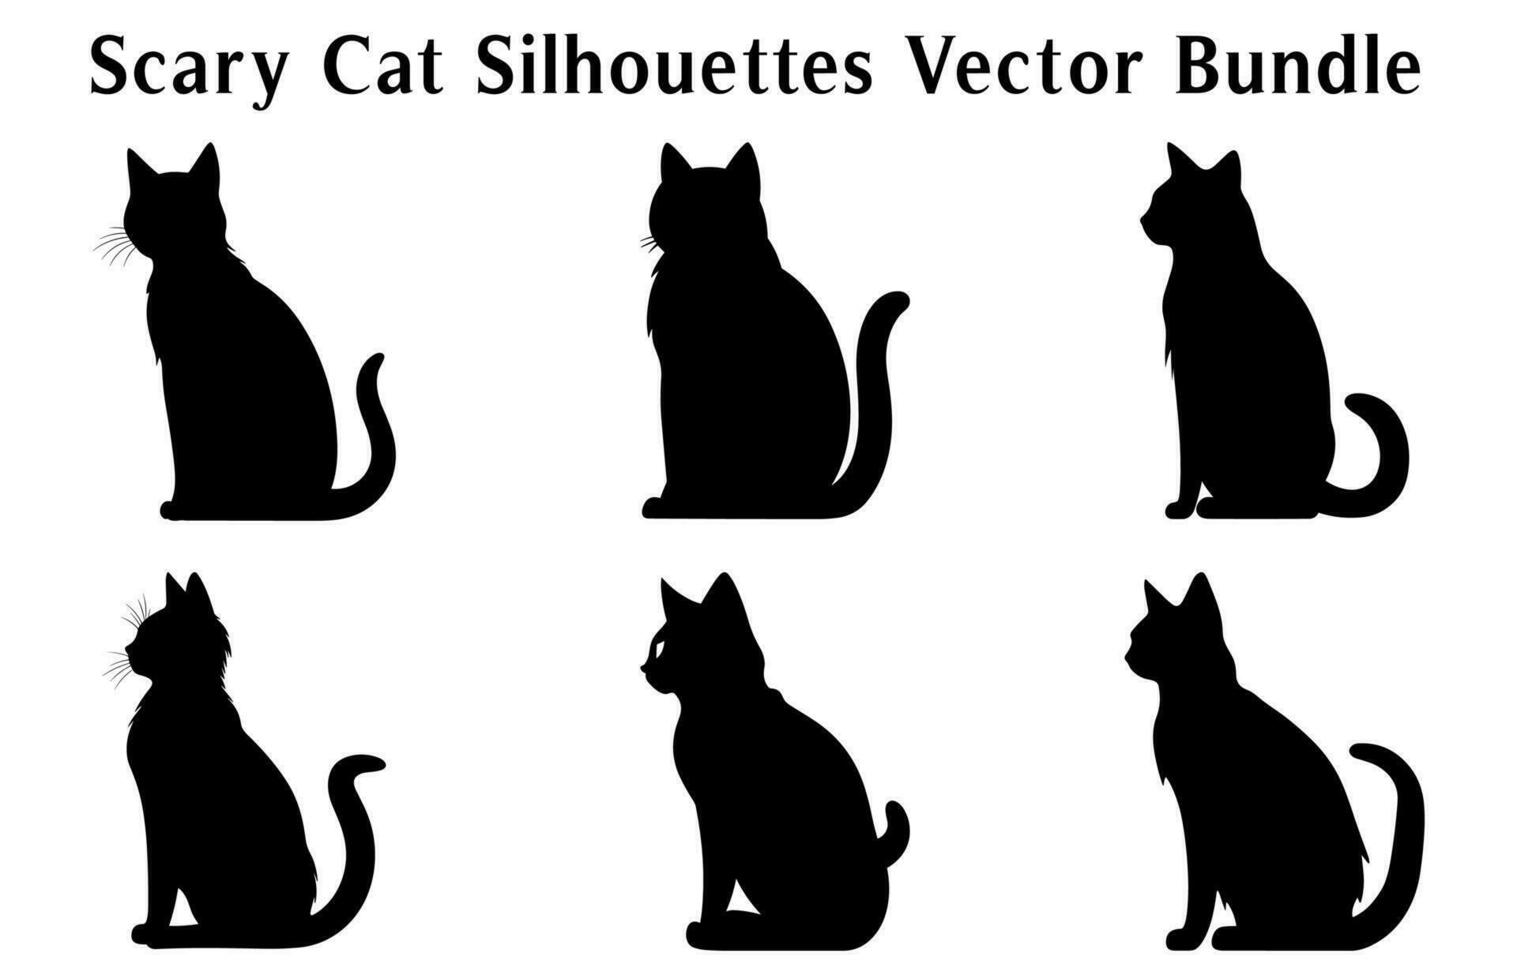 Free Scary Cat Vector illustration bundle, a silhouette Set of Halloween evil black cats